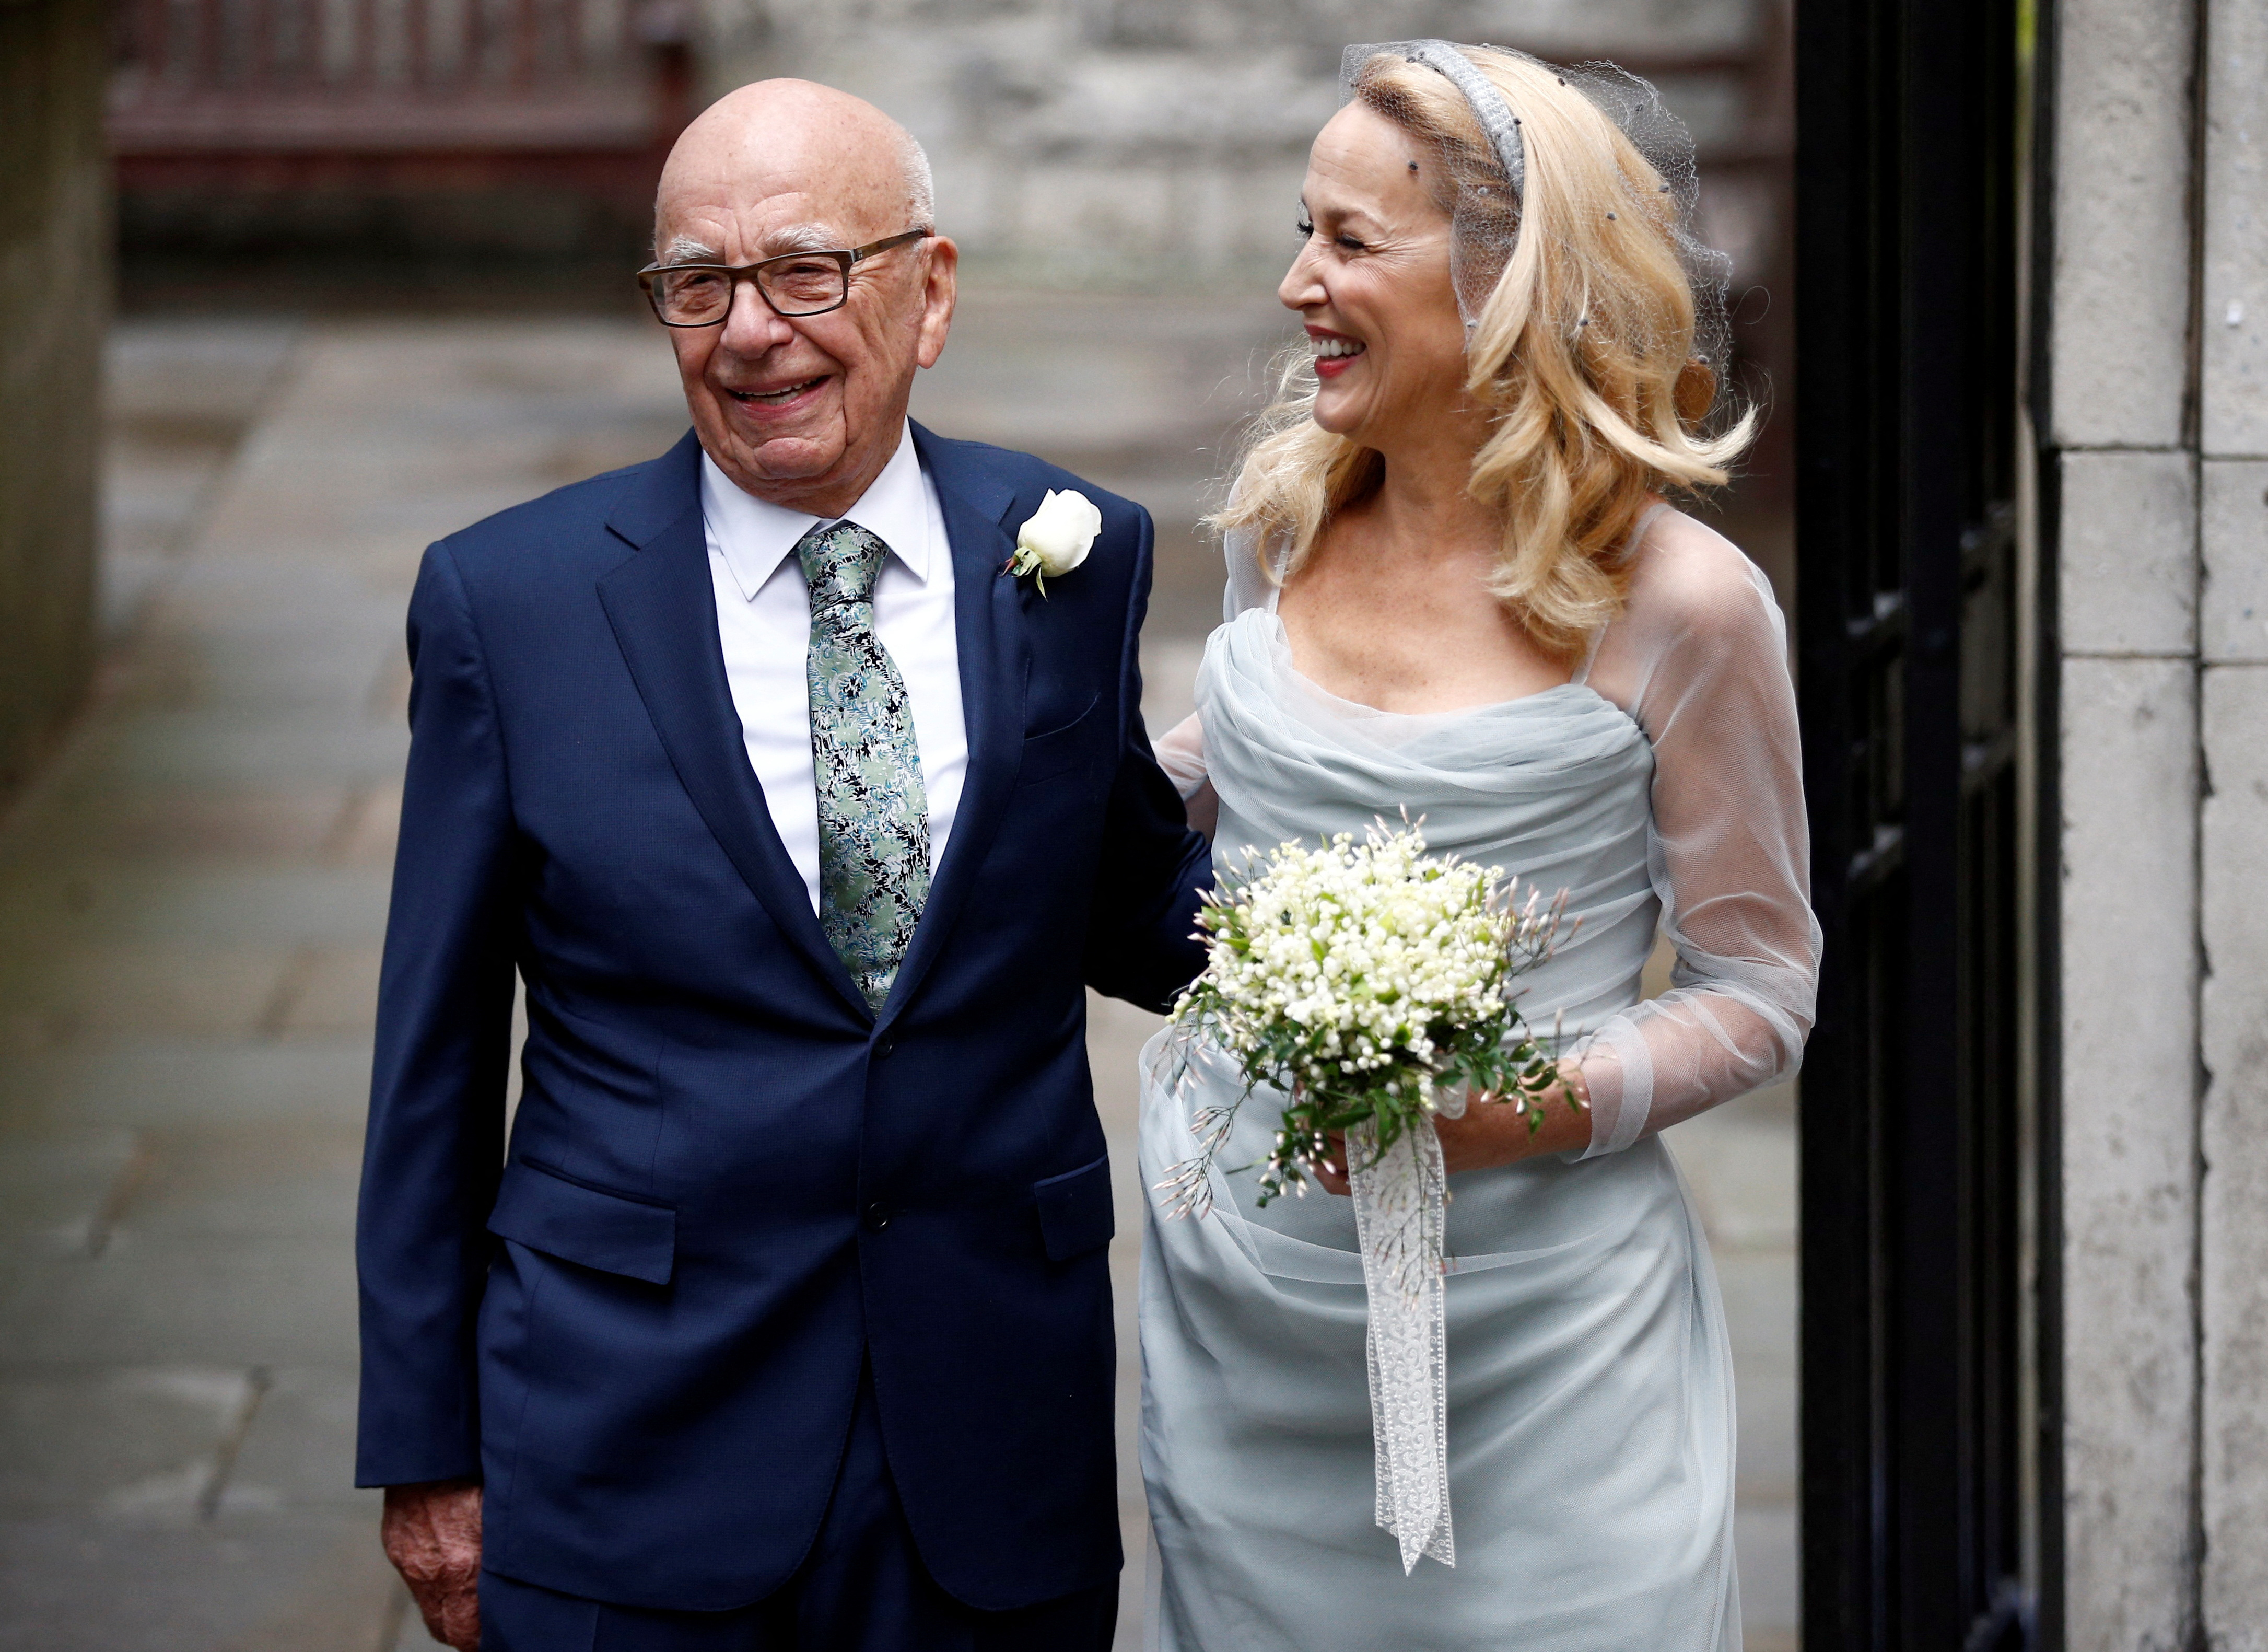 Media Mogul Rupert Murdoch and former supermodel Jerry Hall pose for a photograph outside St Bride's church following a service to celebrate their wedding which took place on Friday, in London